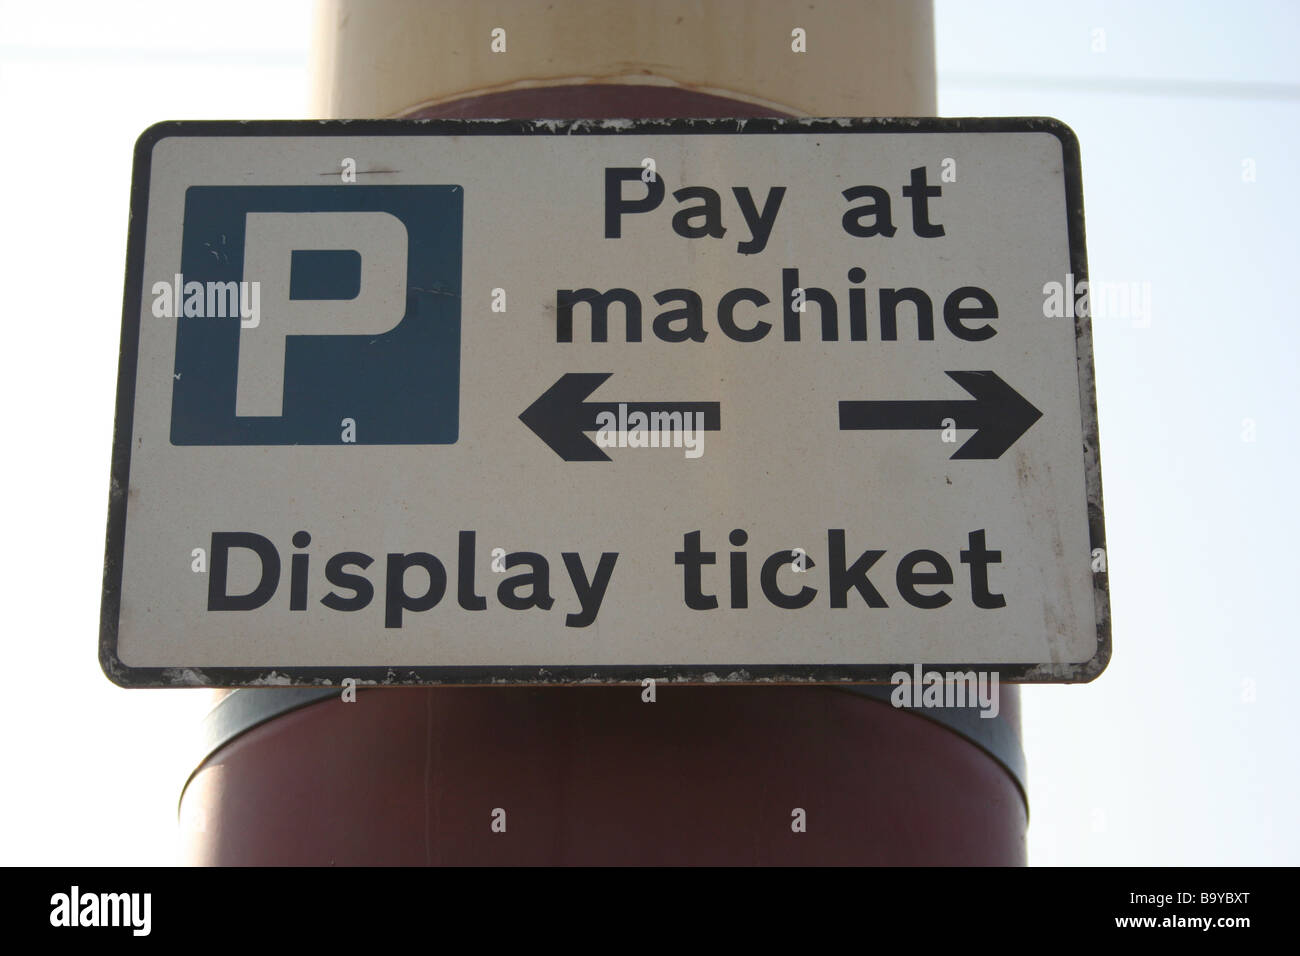 Parking Sign Stock Photo